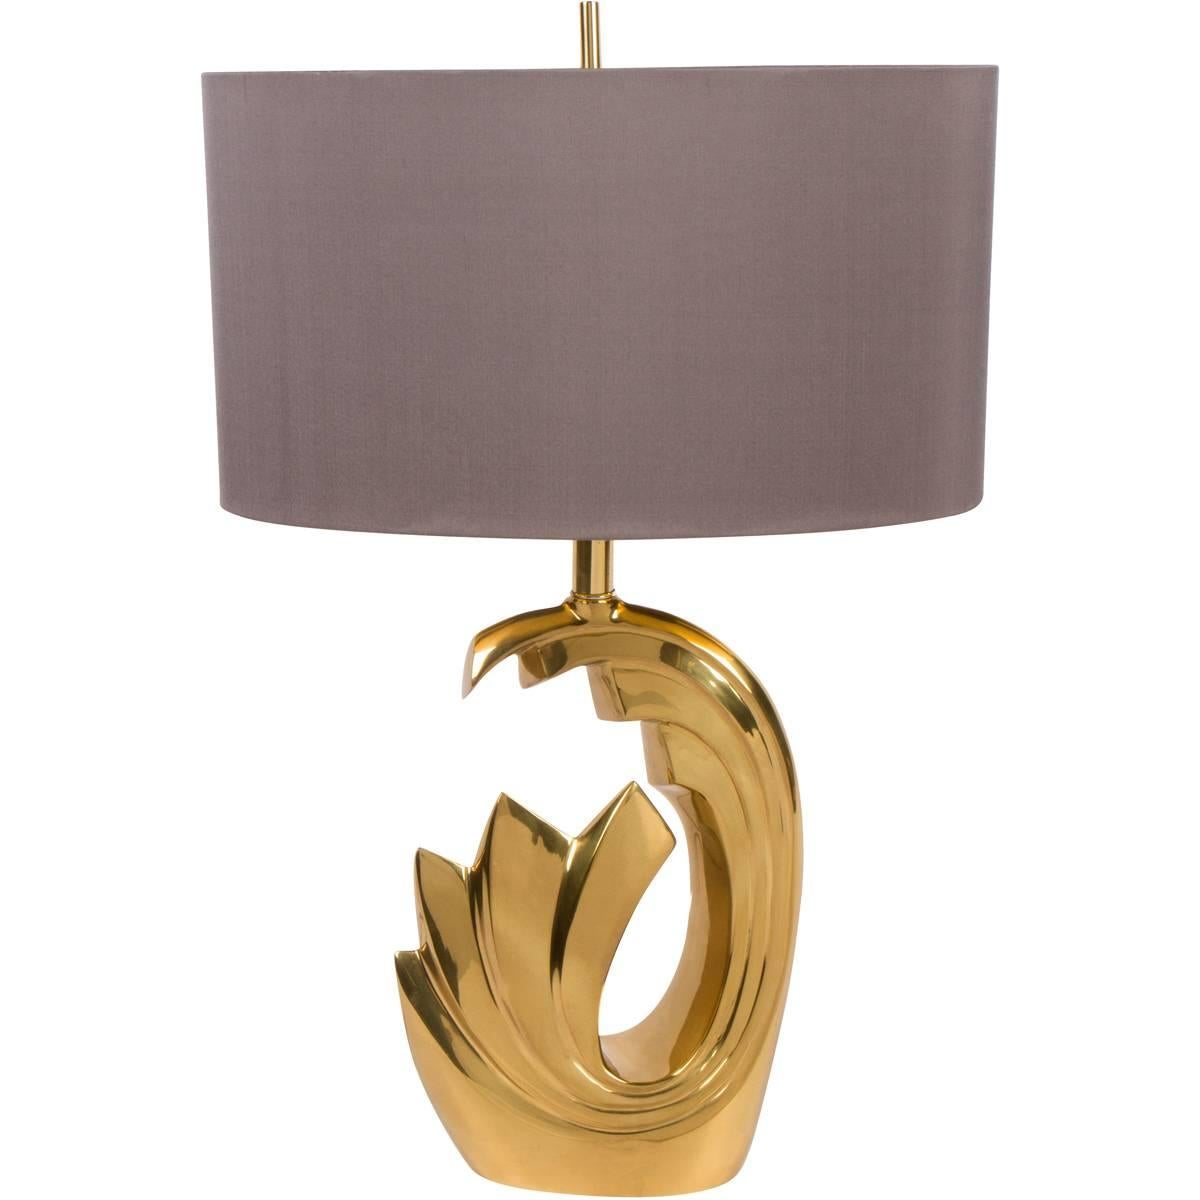 Brass Lamp attributed to Pierre Cardin, 1970s